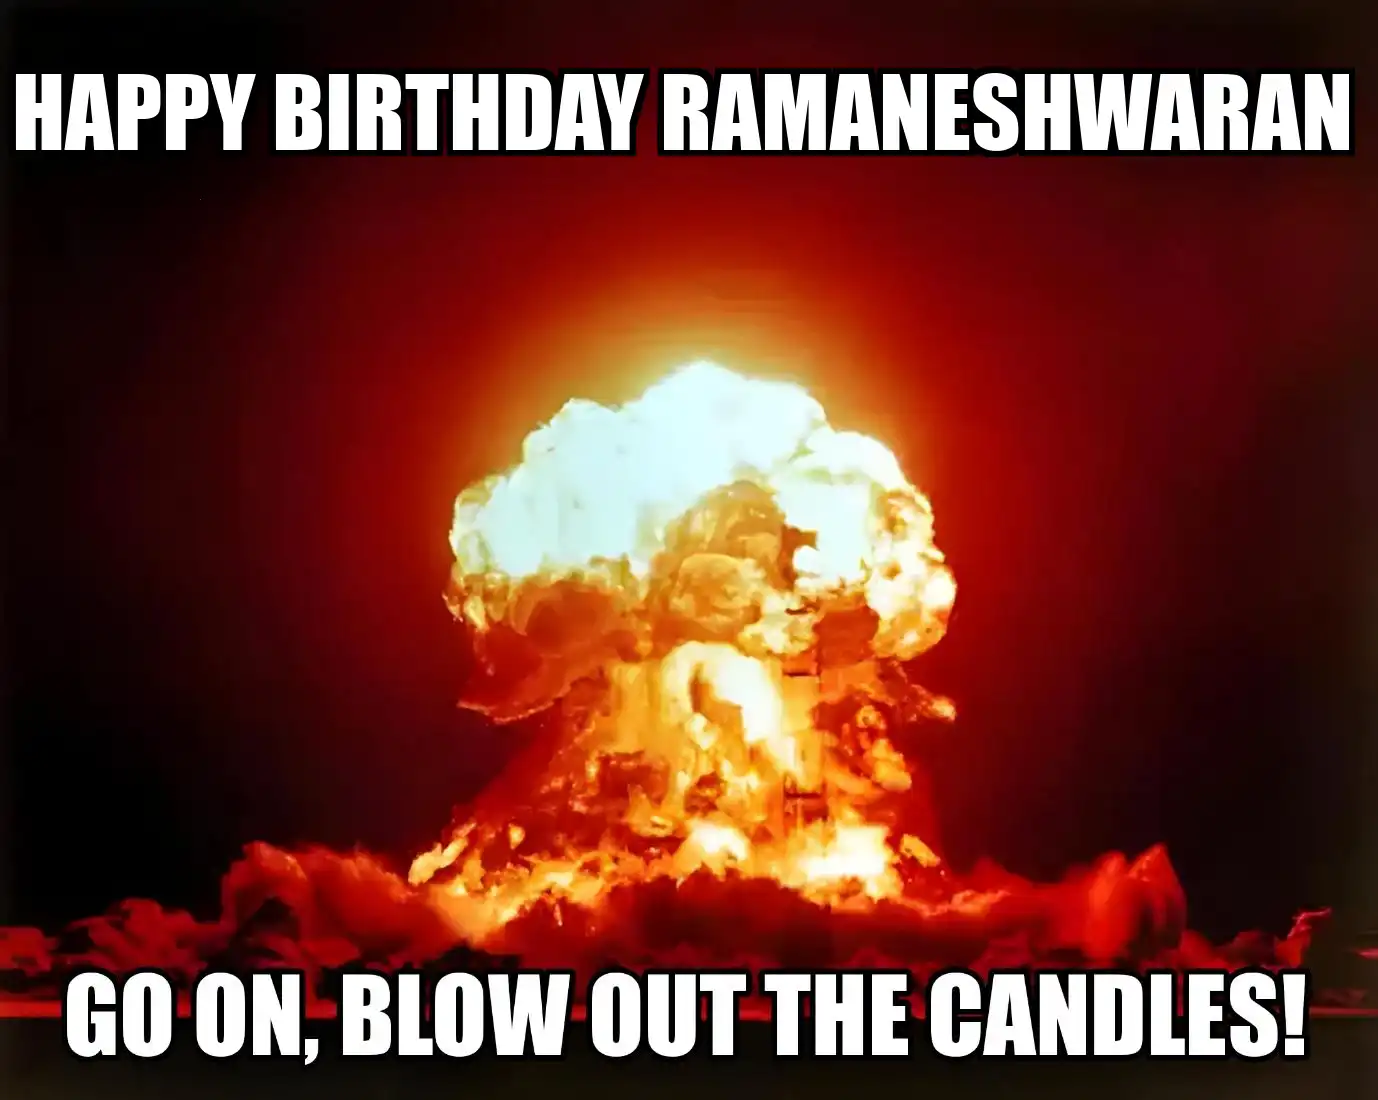 Happy Birthday Ramaneshwaran Go On Blow Out The Candles Meme